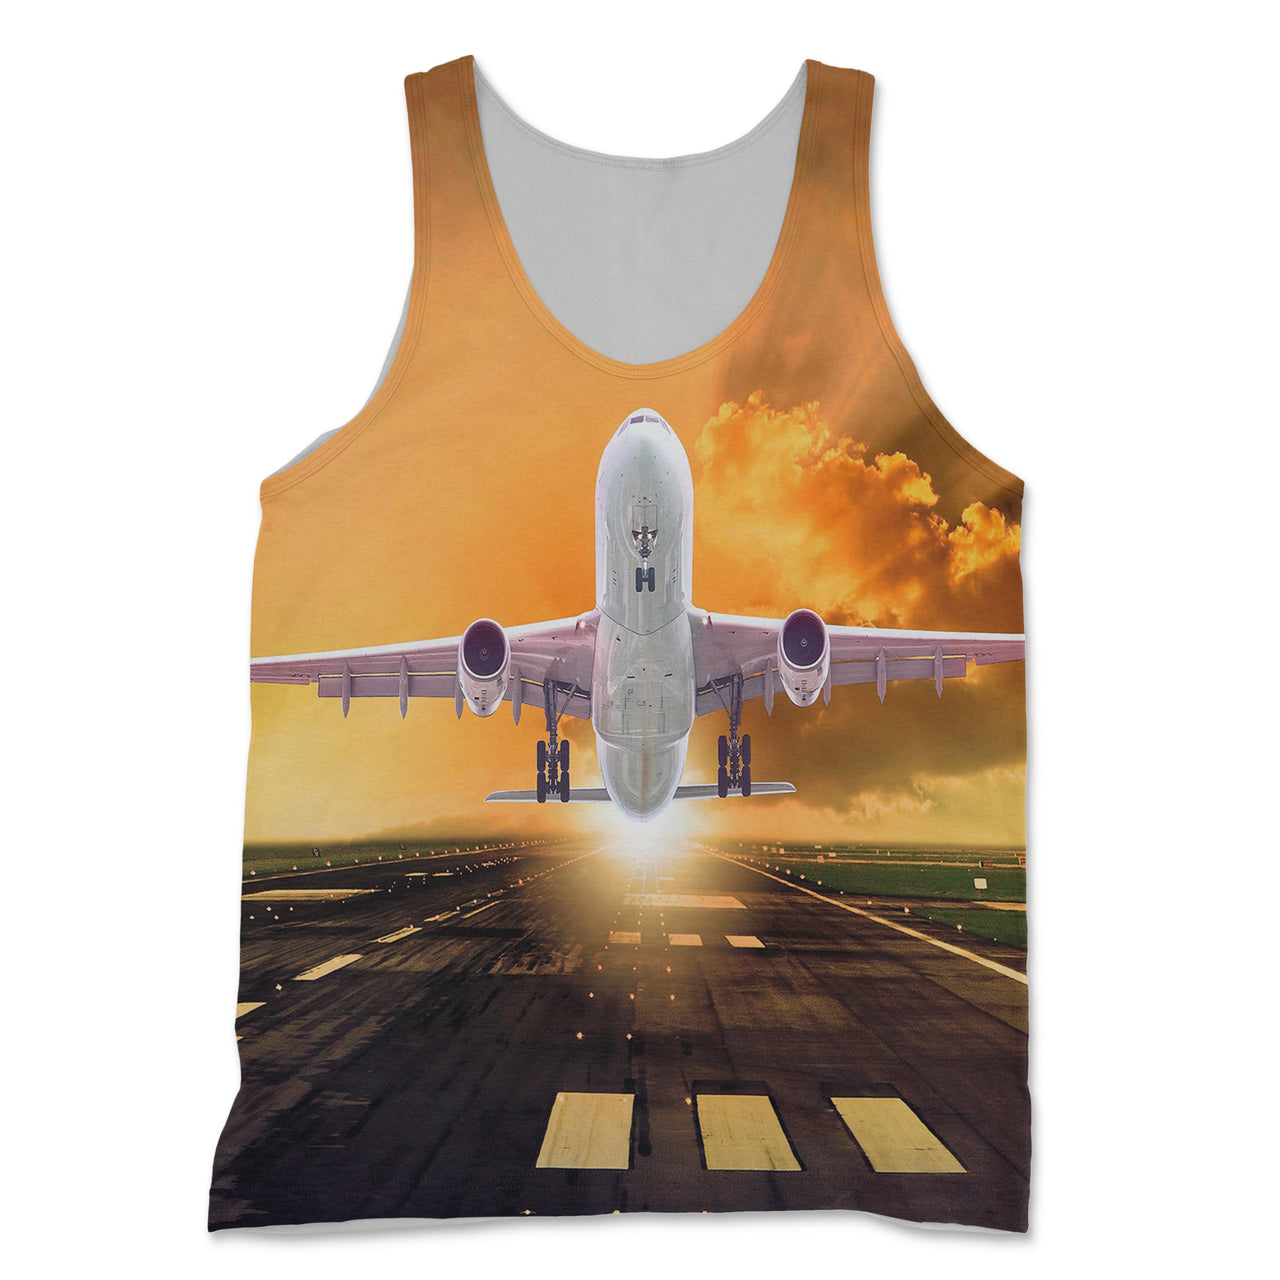 Amazing Departing Aircraft Sunset & Clouds Behind Designed 3D Tank Tops